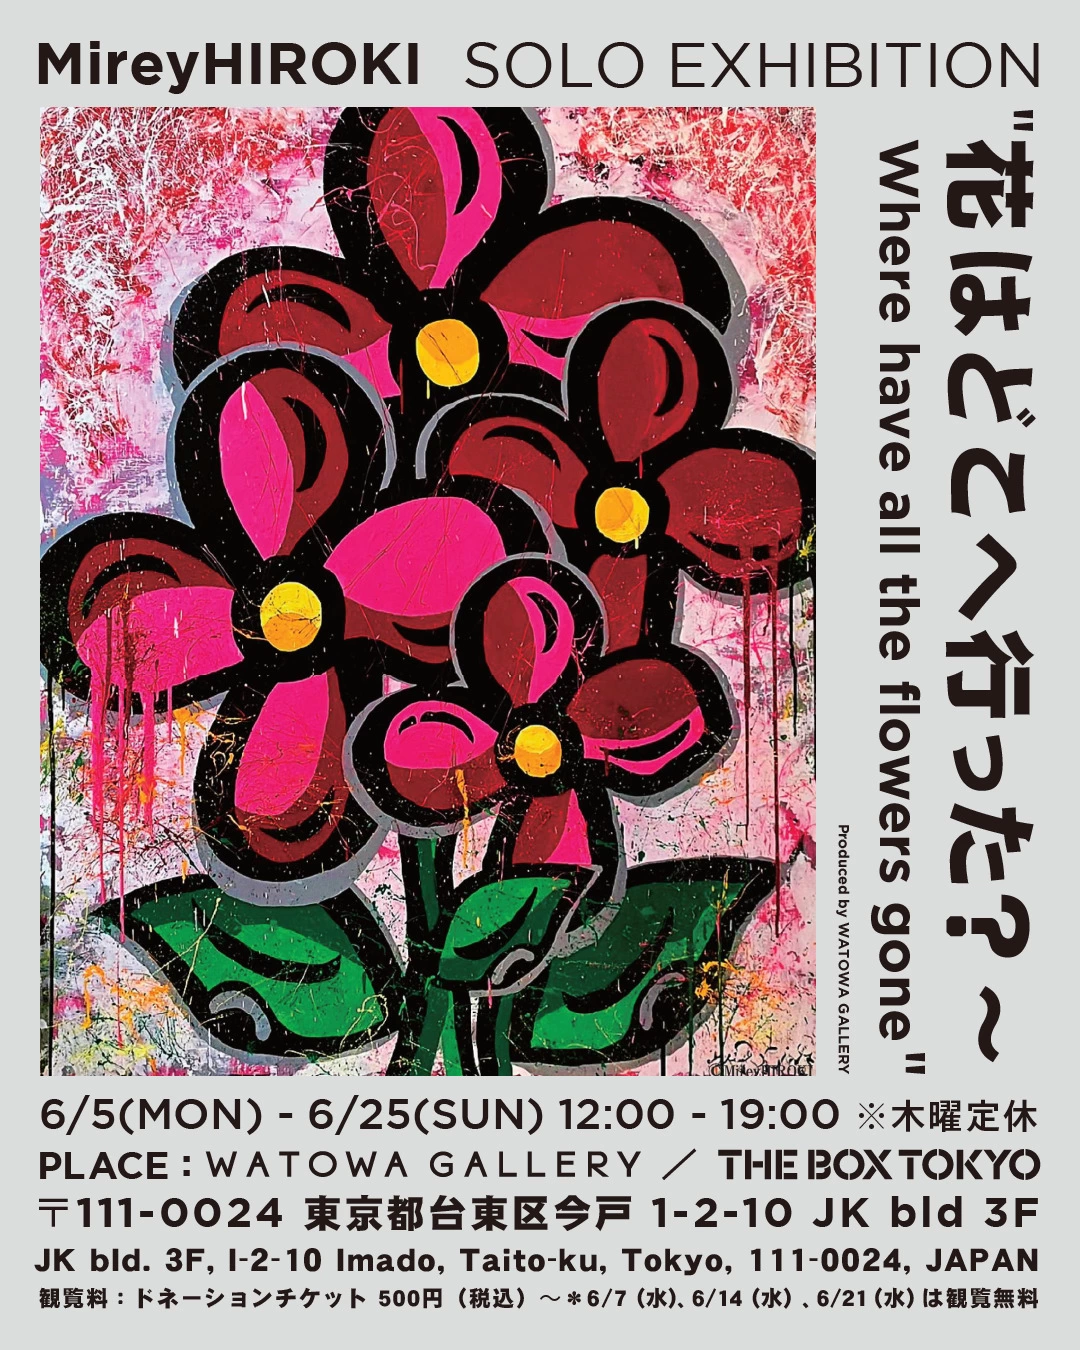 MireyHIROKI SOLO EXHIBITION “花はどこへ行った ～Where have all the flowers gone”